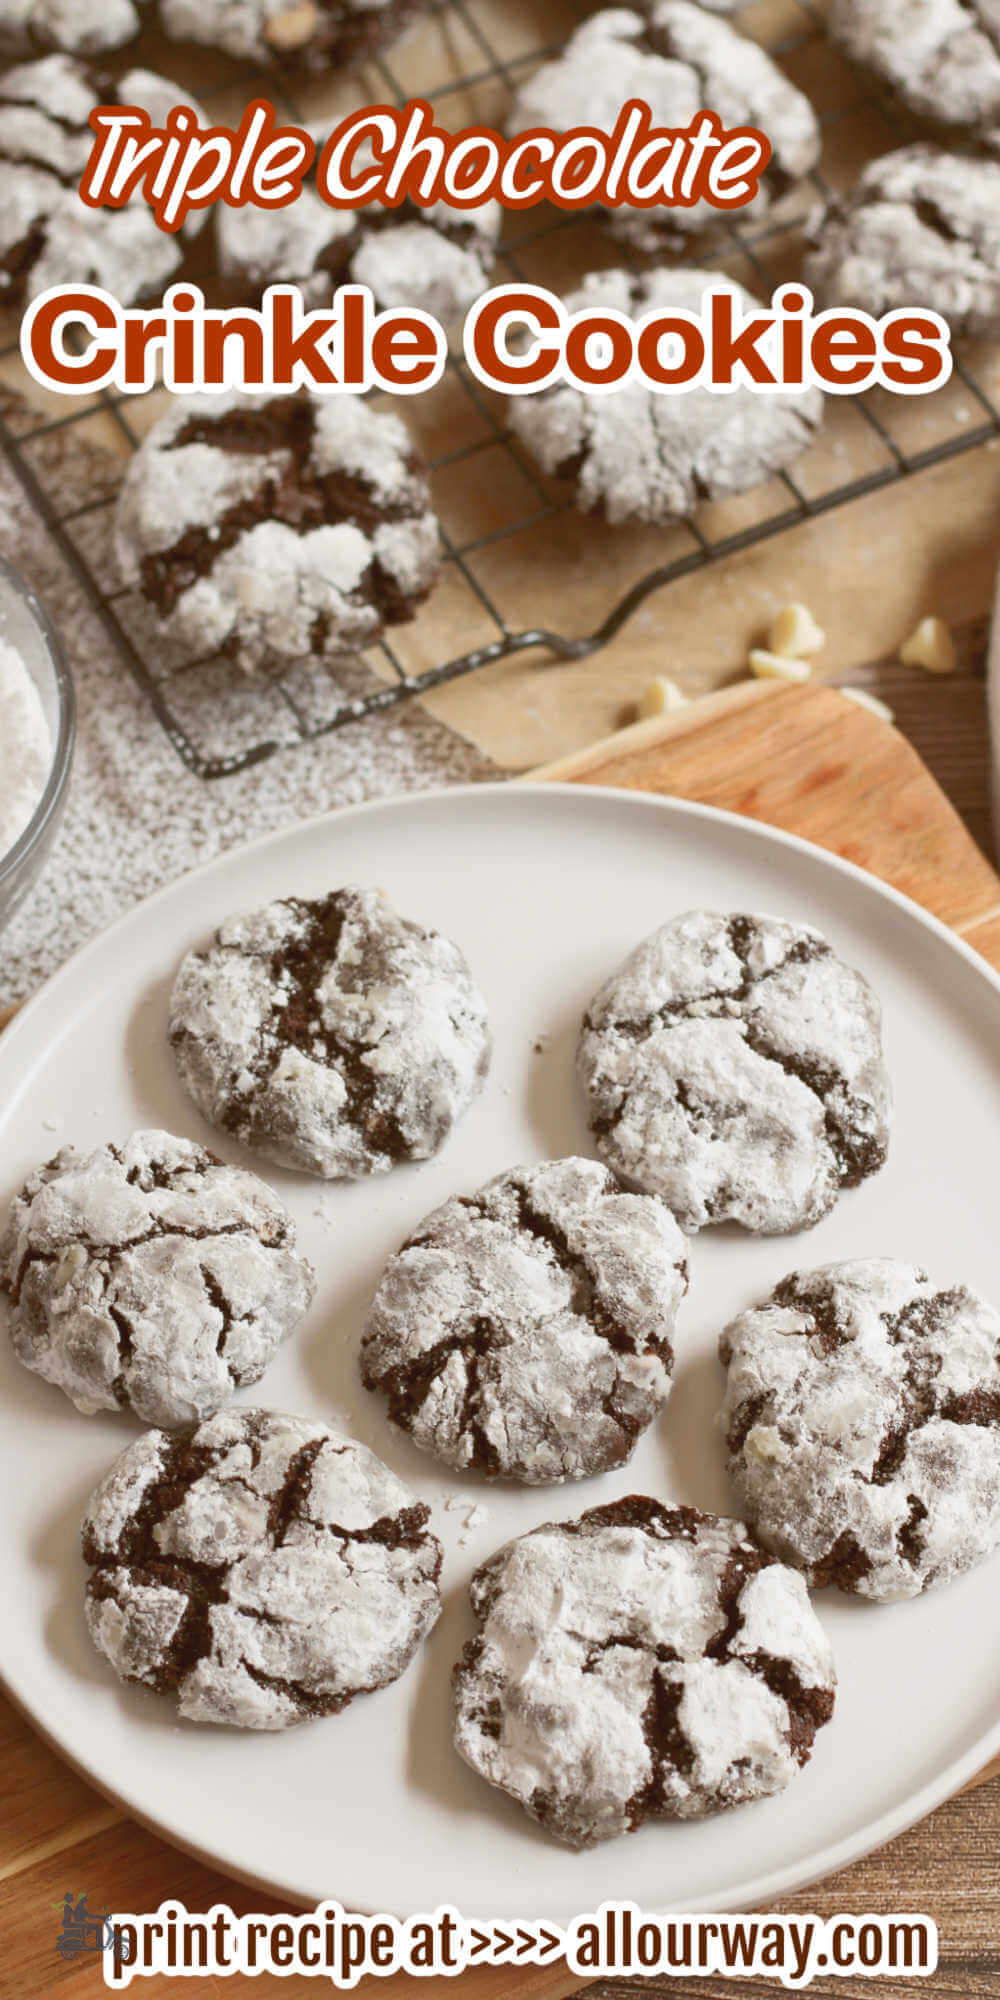 These Triple Chocolate Crinkle Cookies are made with decadent chocolate chip cookie dough, which is first chilled before rolled in powdered sugar and baked. Once baked, these cookies are cooled and sprinkled with extra powdered sugar over the cracked tops! Make them for family and friends or for your cookie swaps.